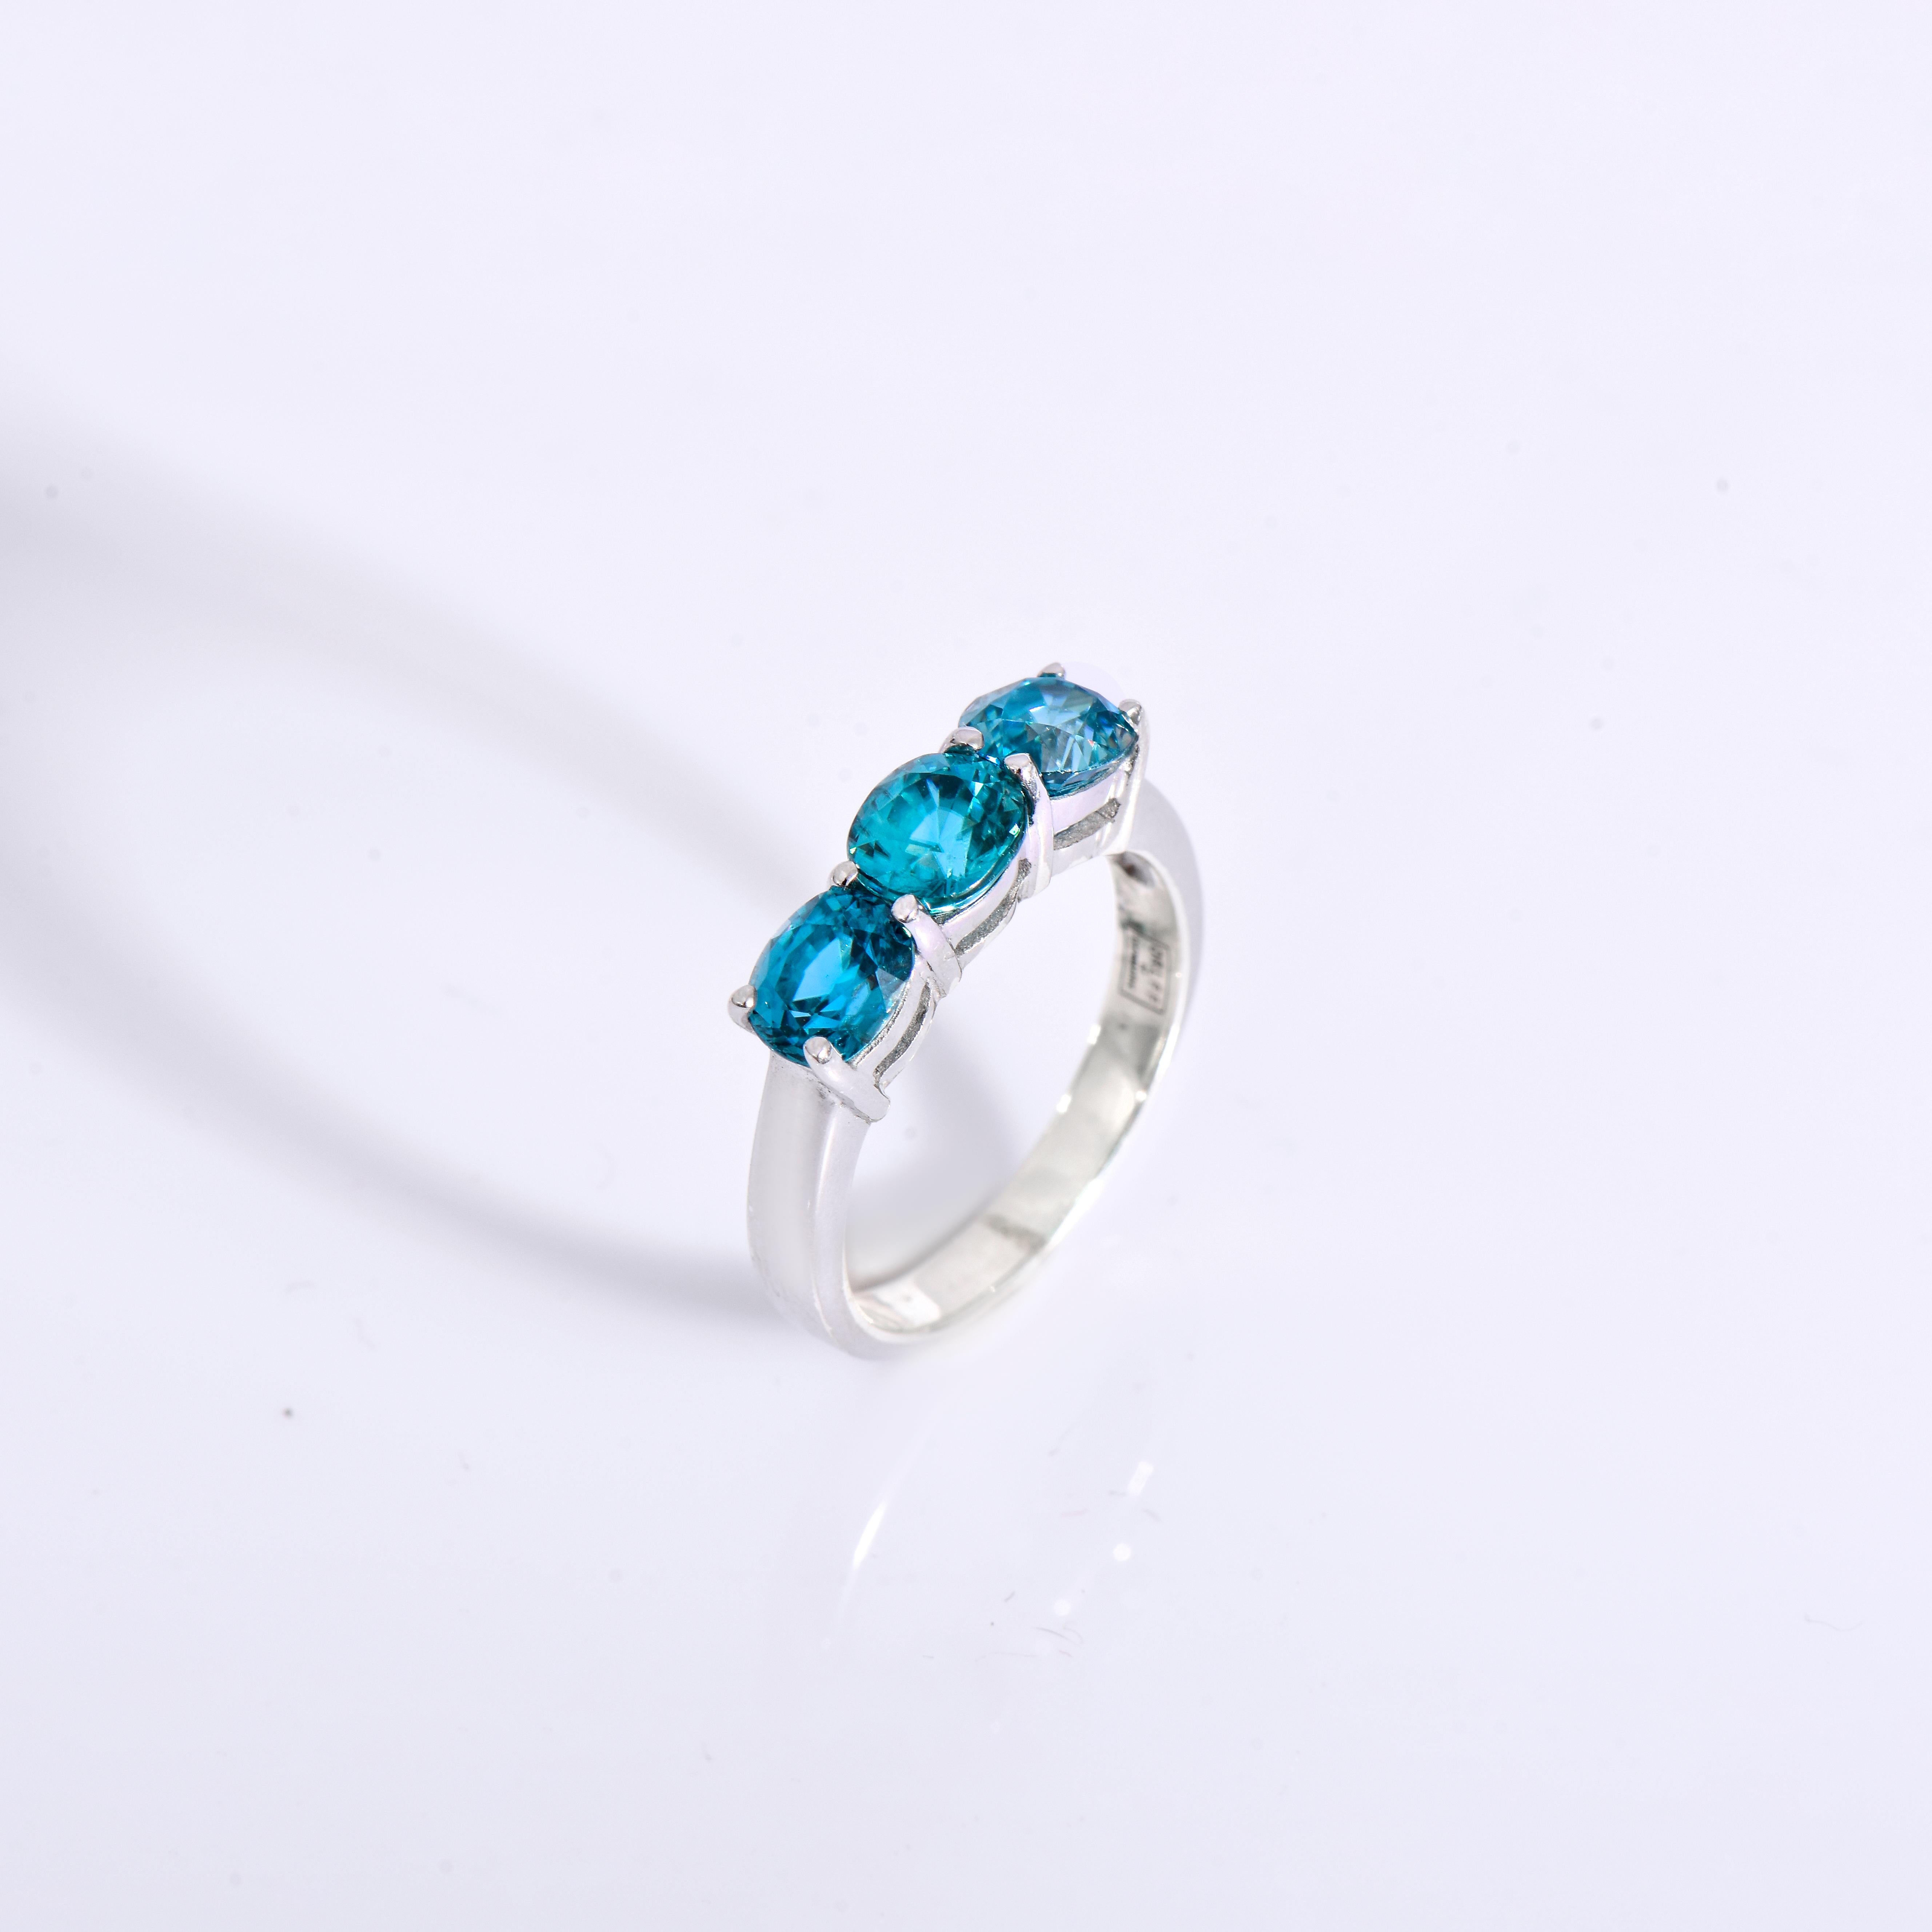 Orloff of Denmark; 925 Sterling Silver Ring set with three Natural Cambodian Blue Zircons totaling to 3 carats.

This piece has been meticulously hand-crafted out of 925 sterling silver.
In the center sits three 1 carat blue zircons, mined, polished